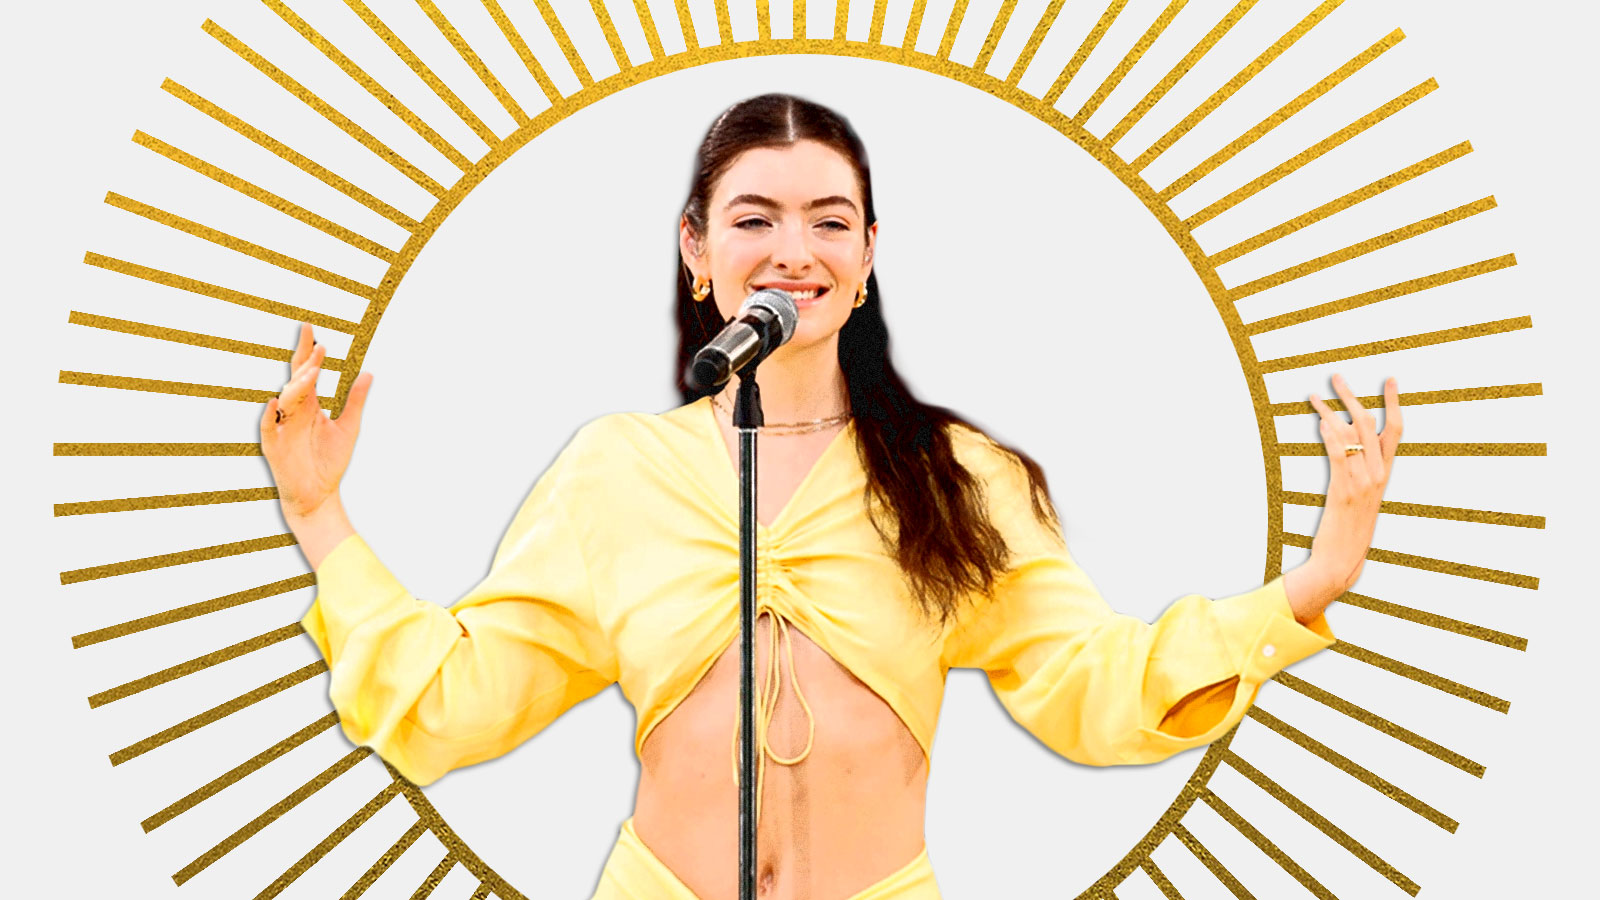 The singer Lorde in front of a sun graphic